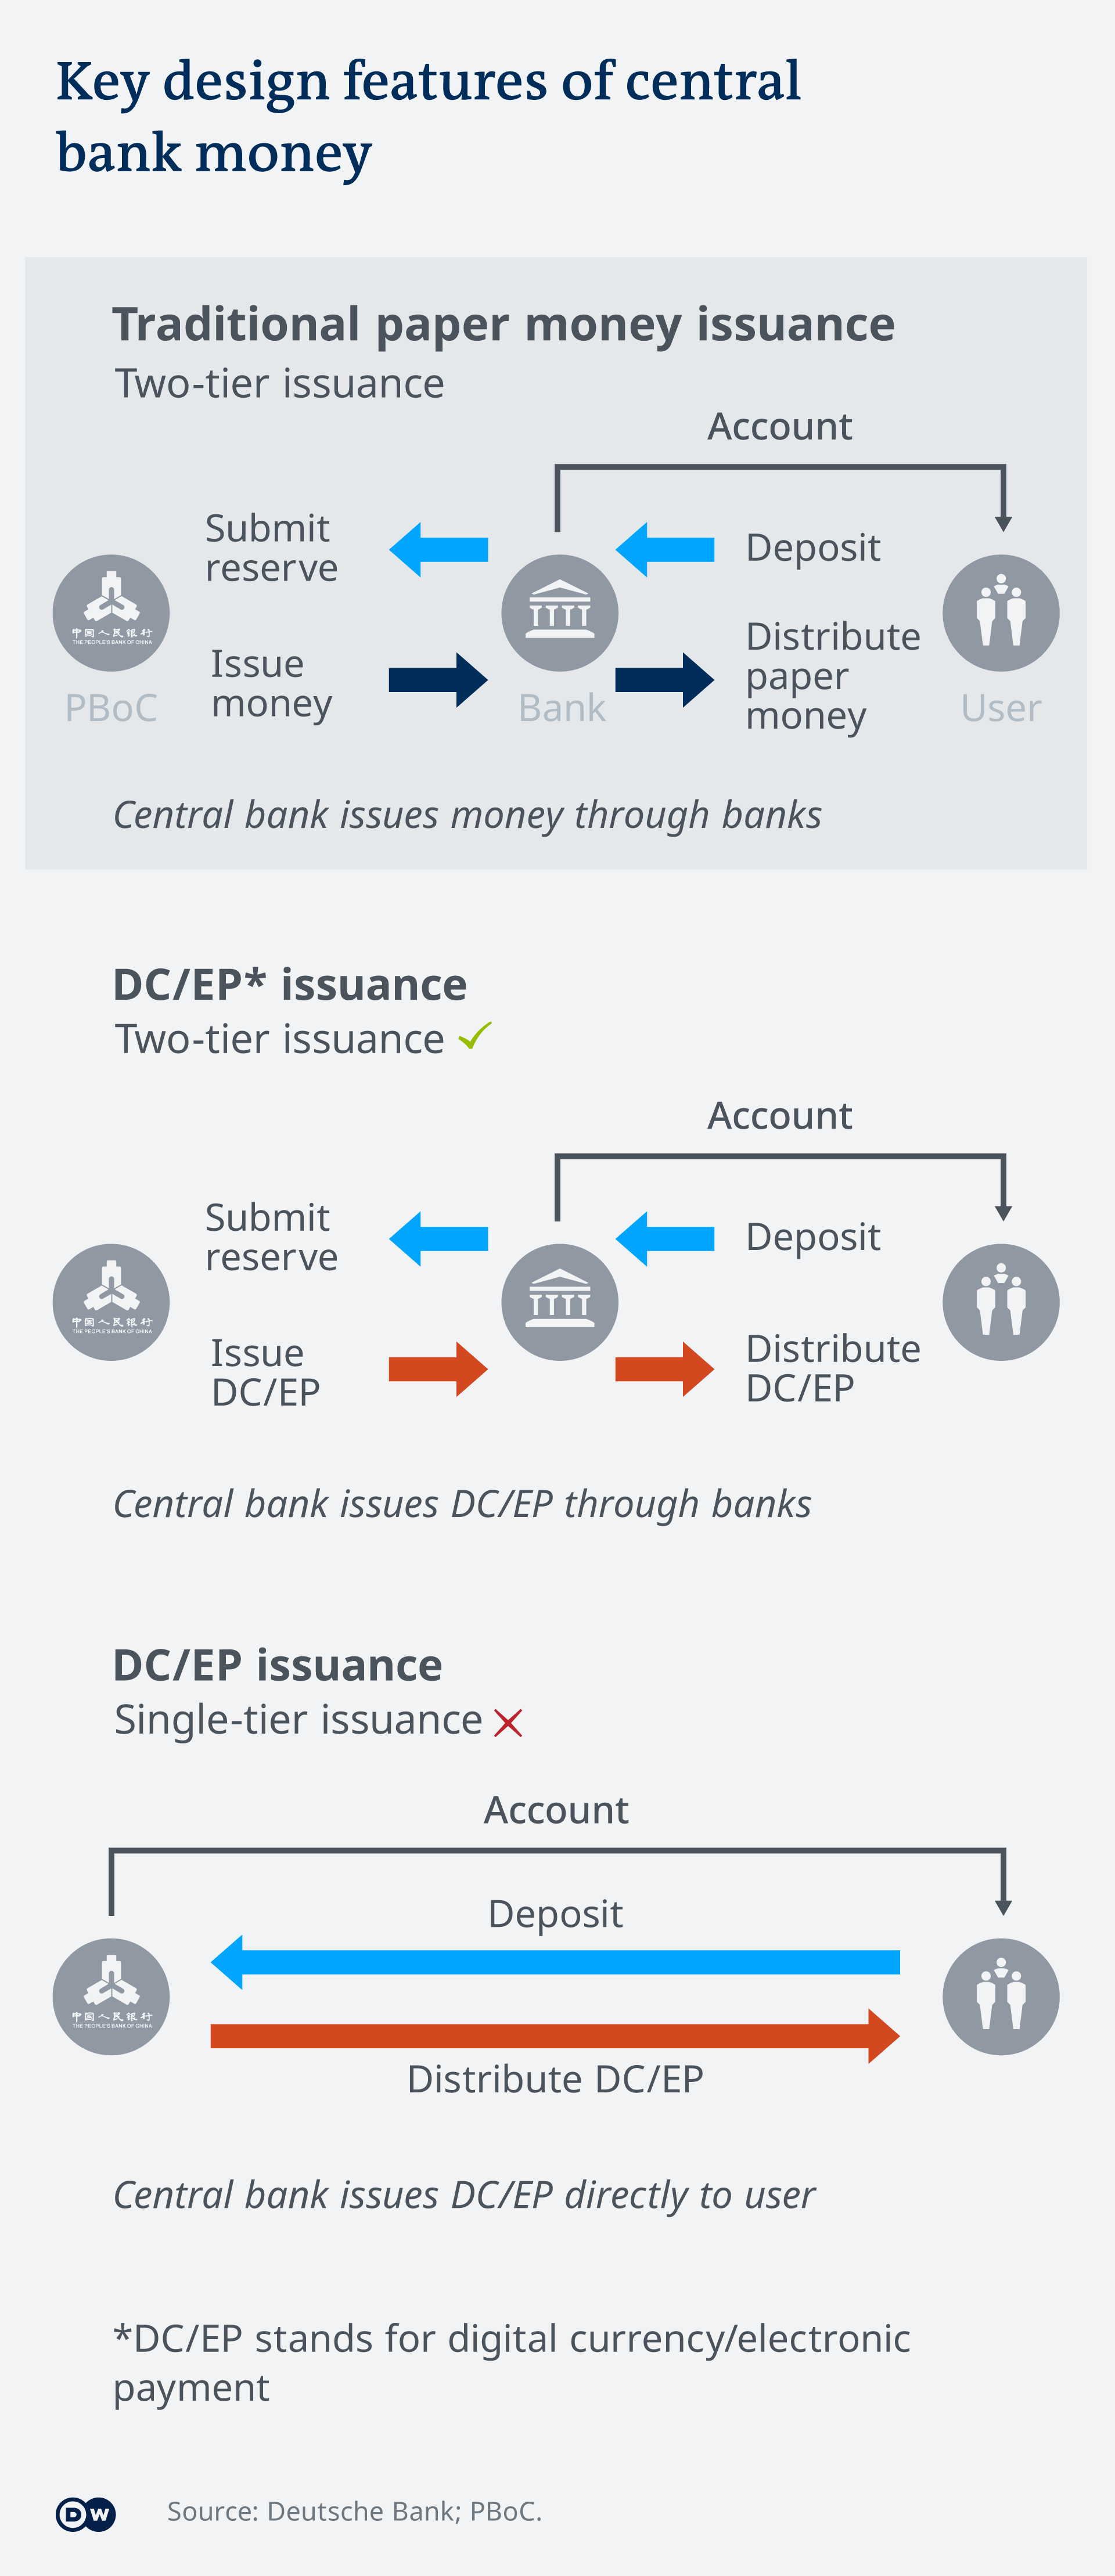 Key design features of central bank money